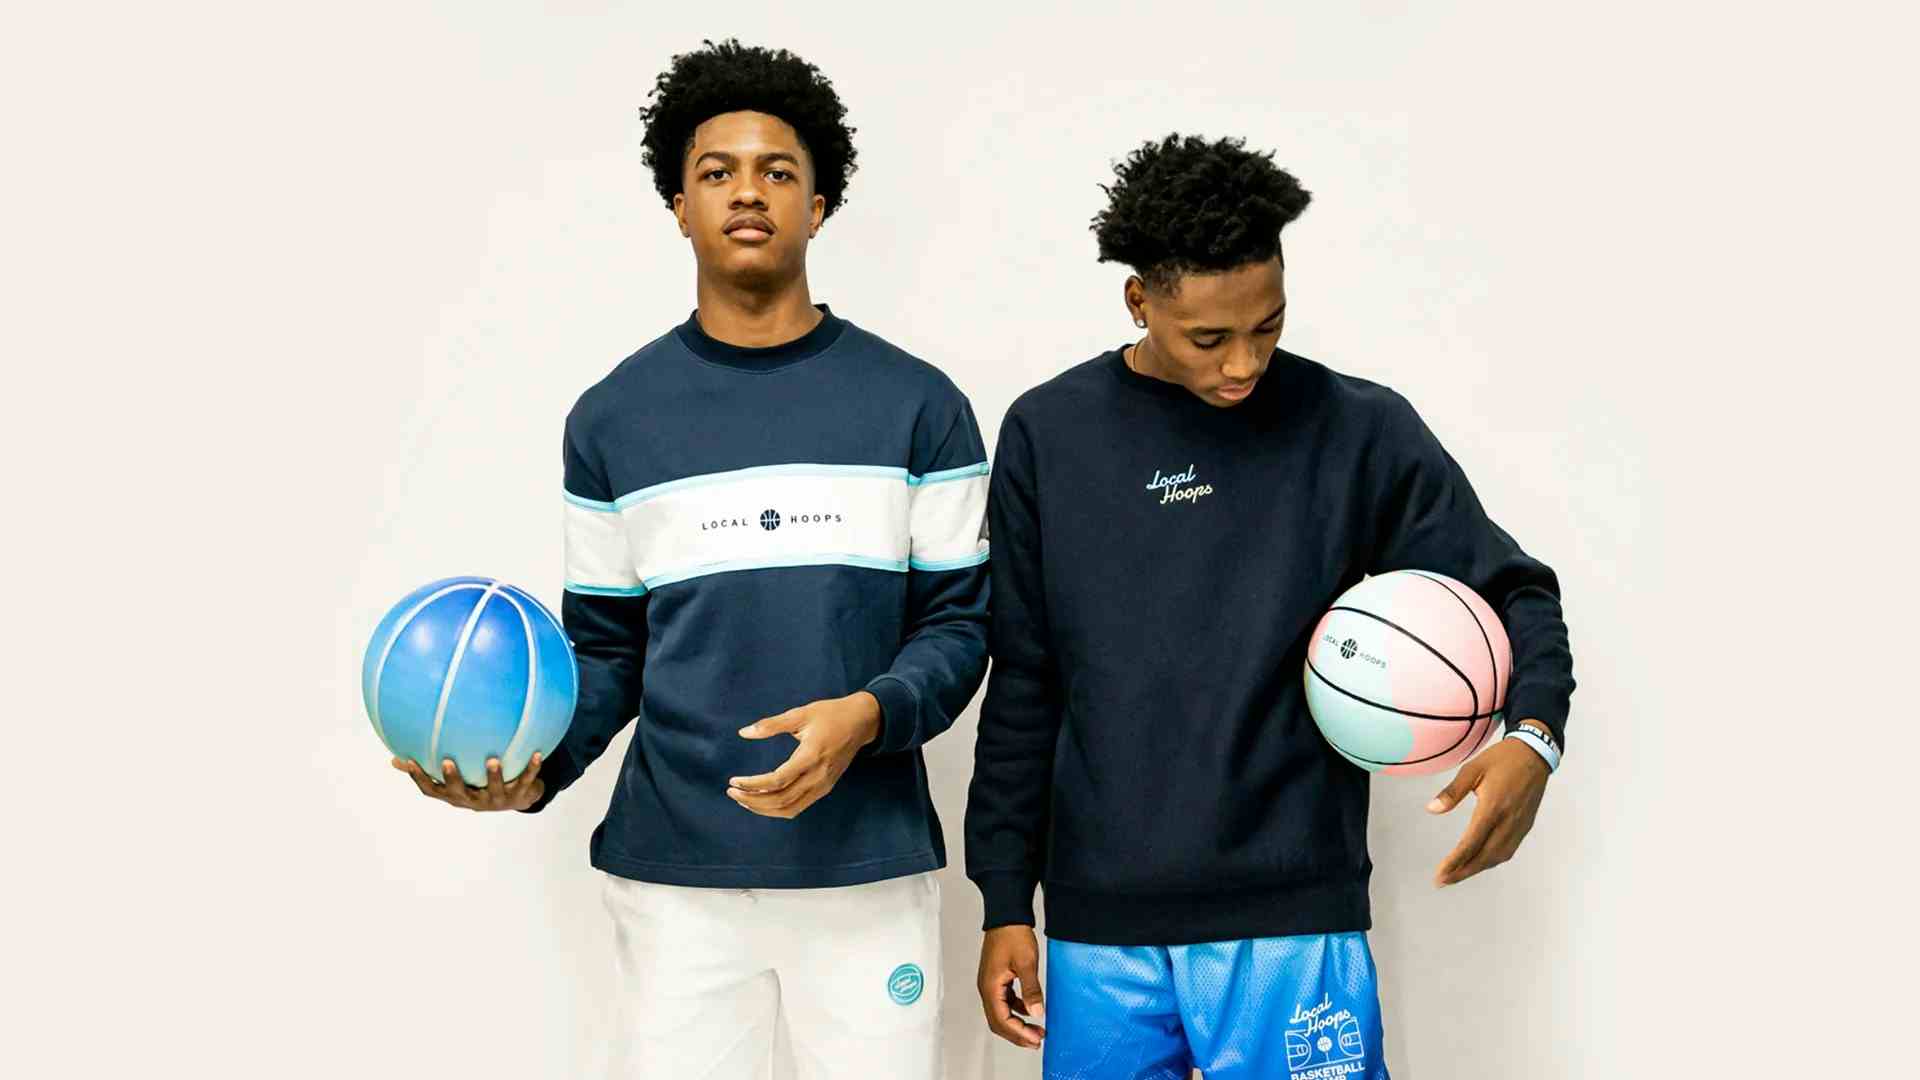 local-hoops-fall-collection